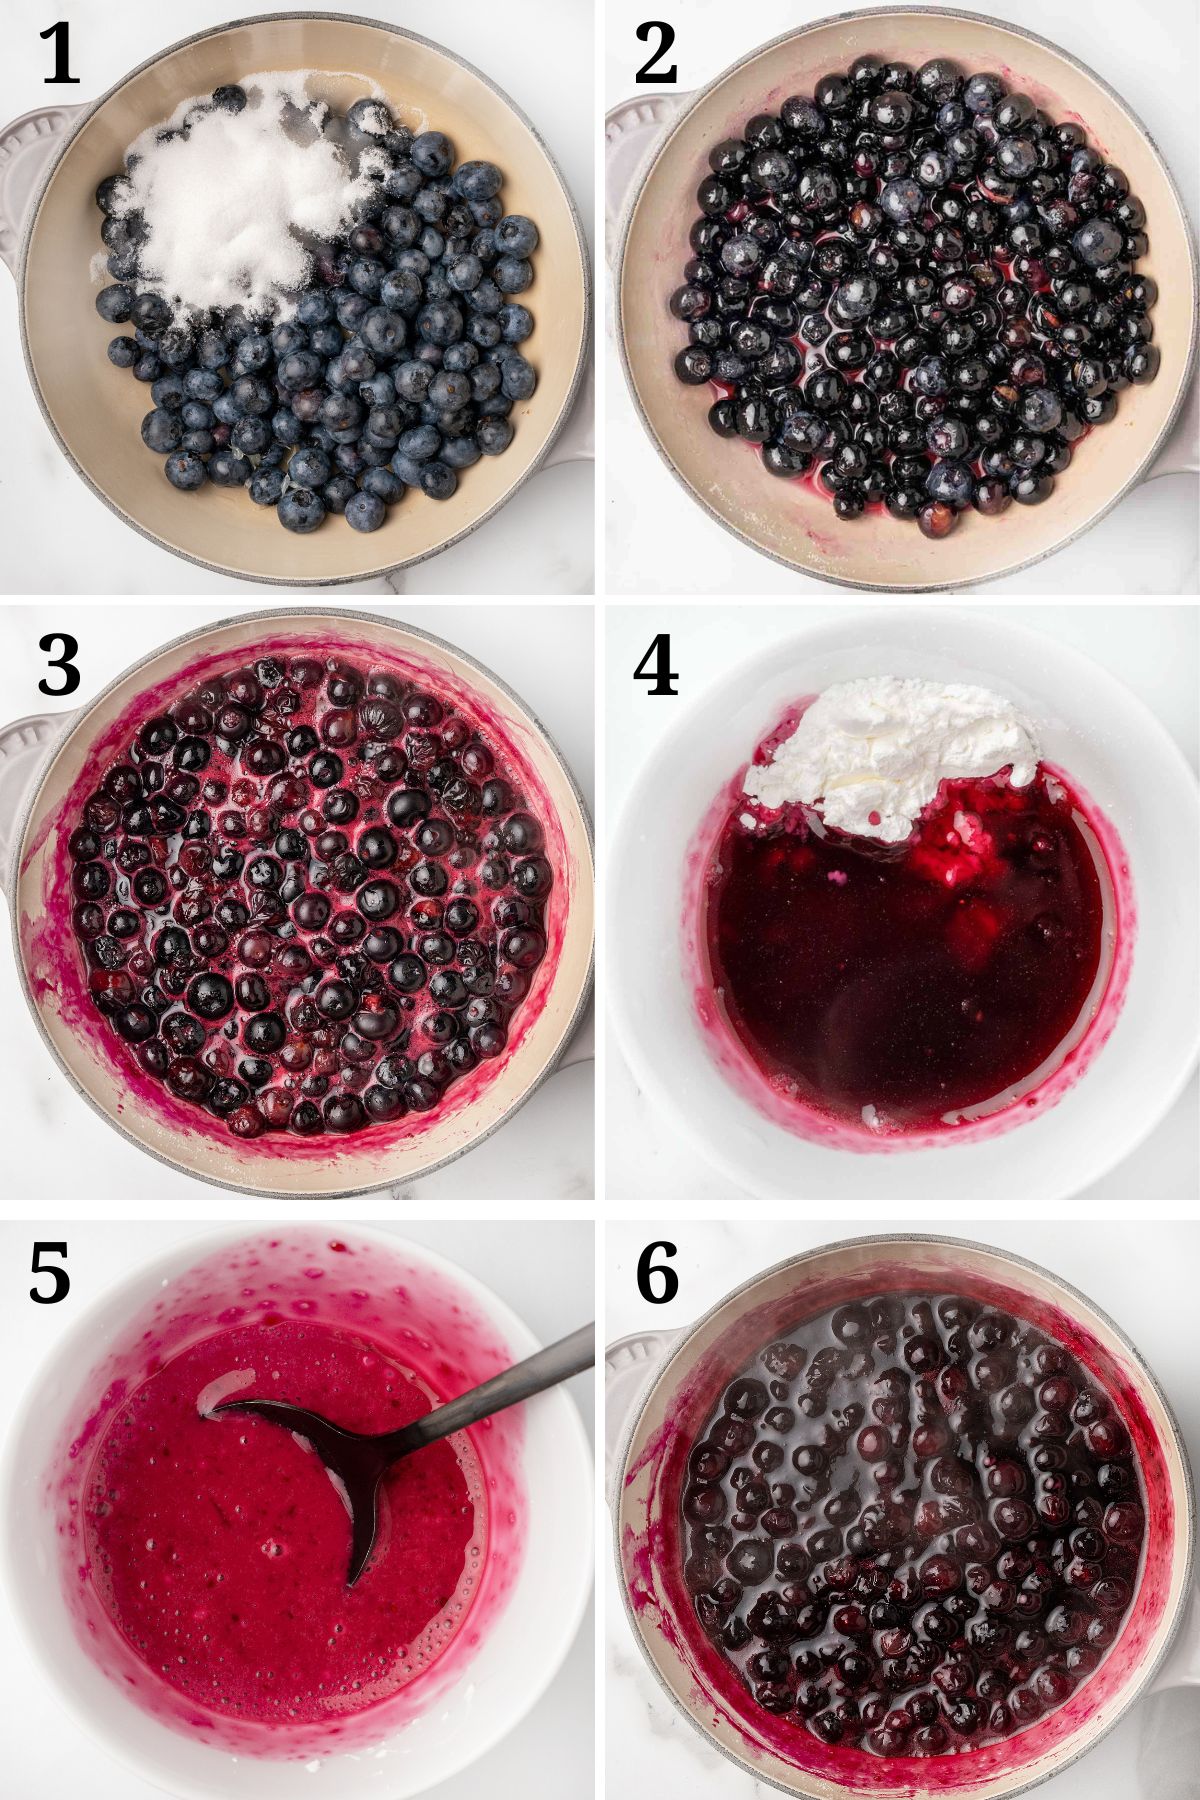 six images showing how to make the blueberry compote.